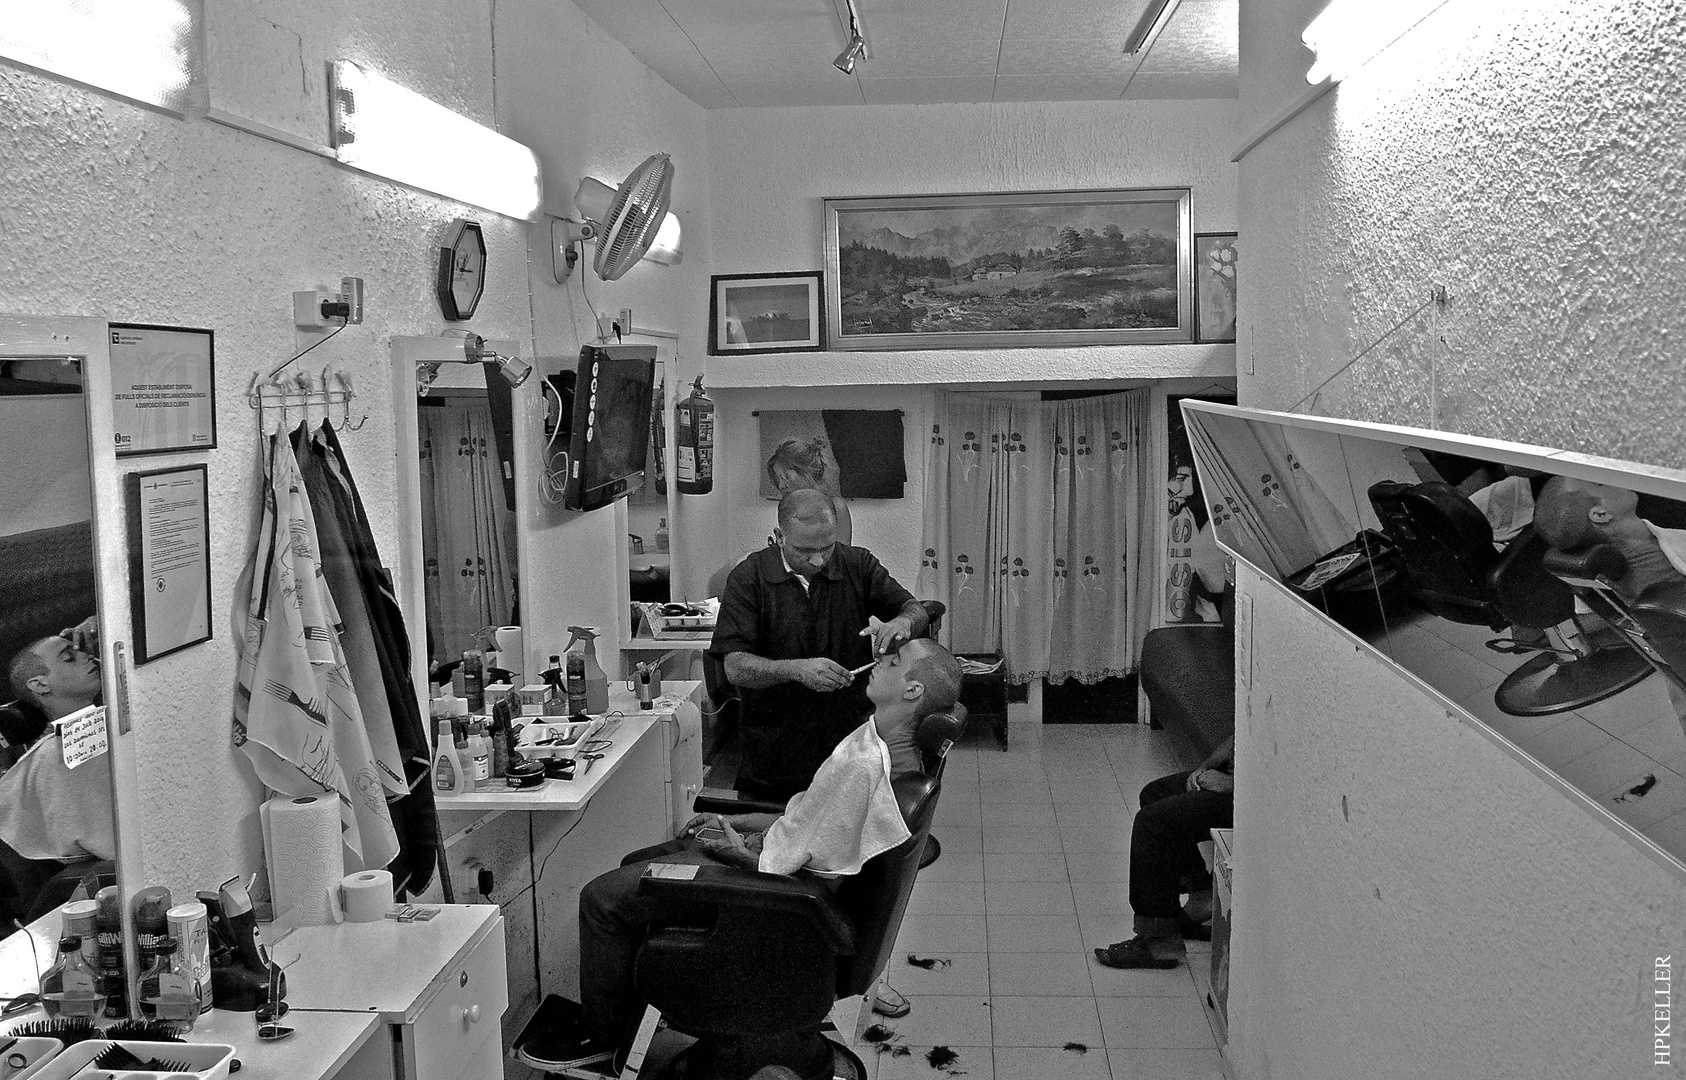 Some days ago in Barcelone, ...at the hairdesser and nose hair trimmer.